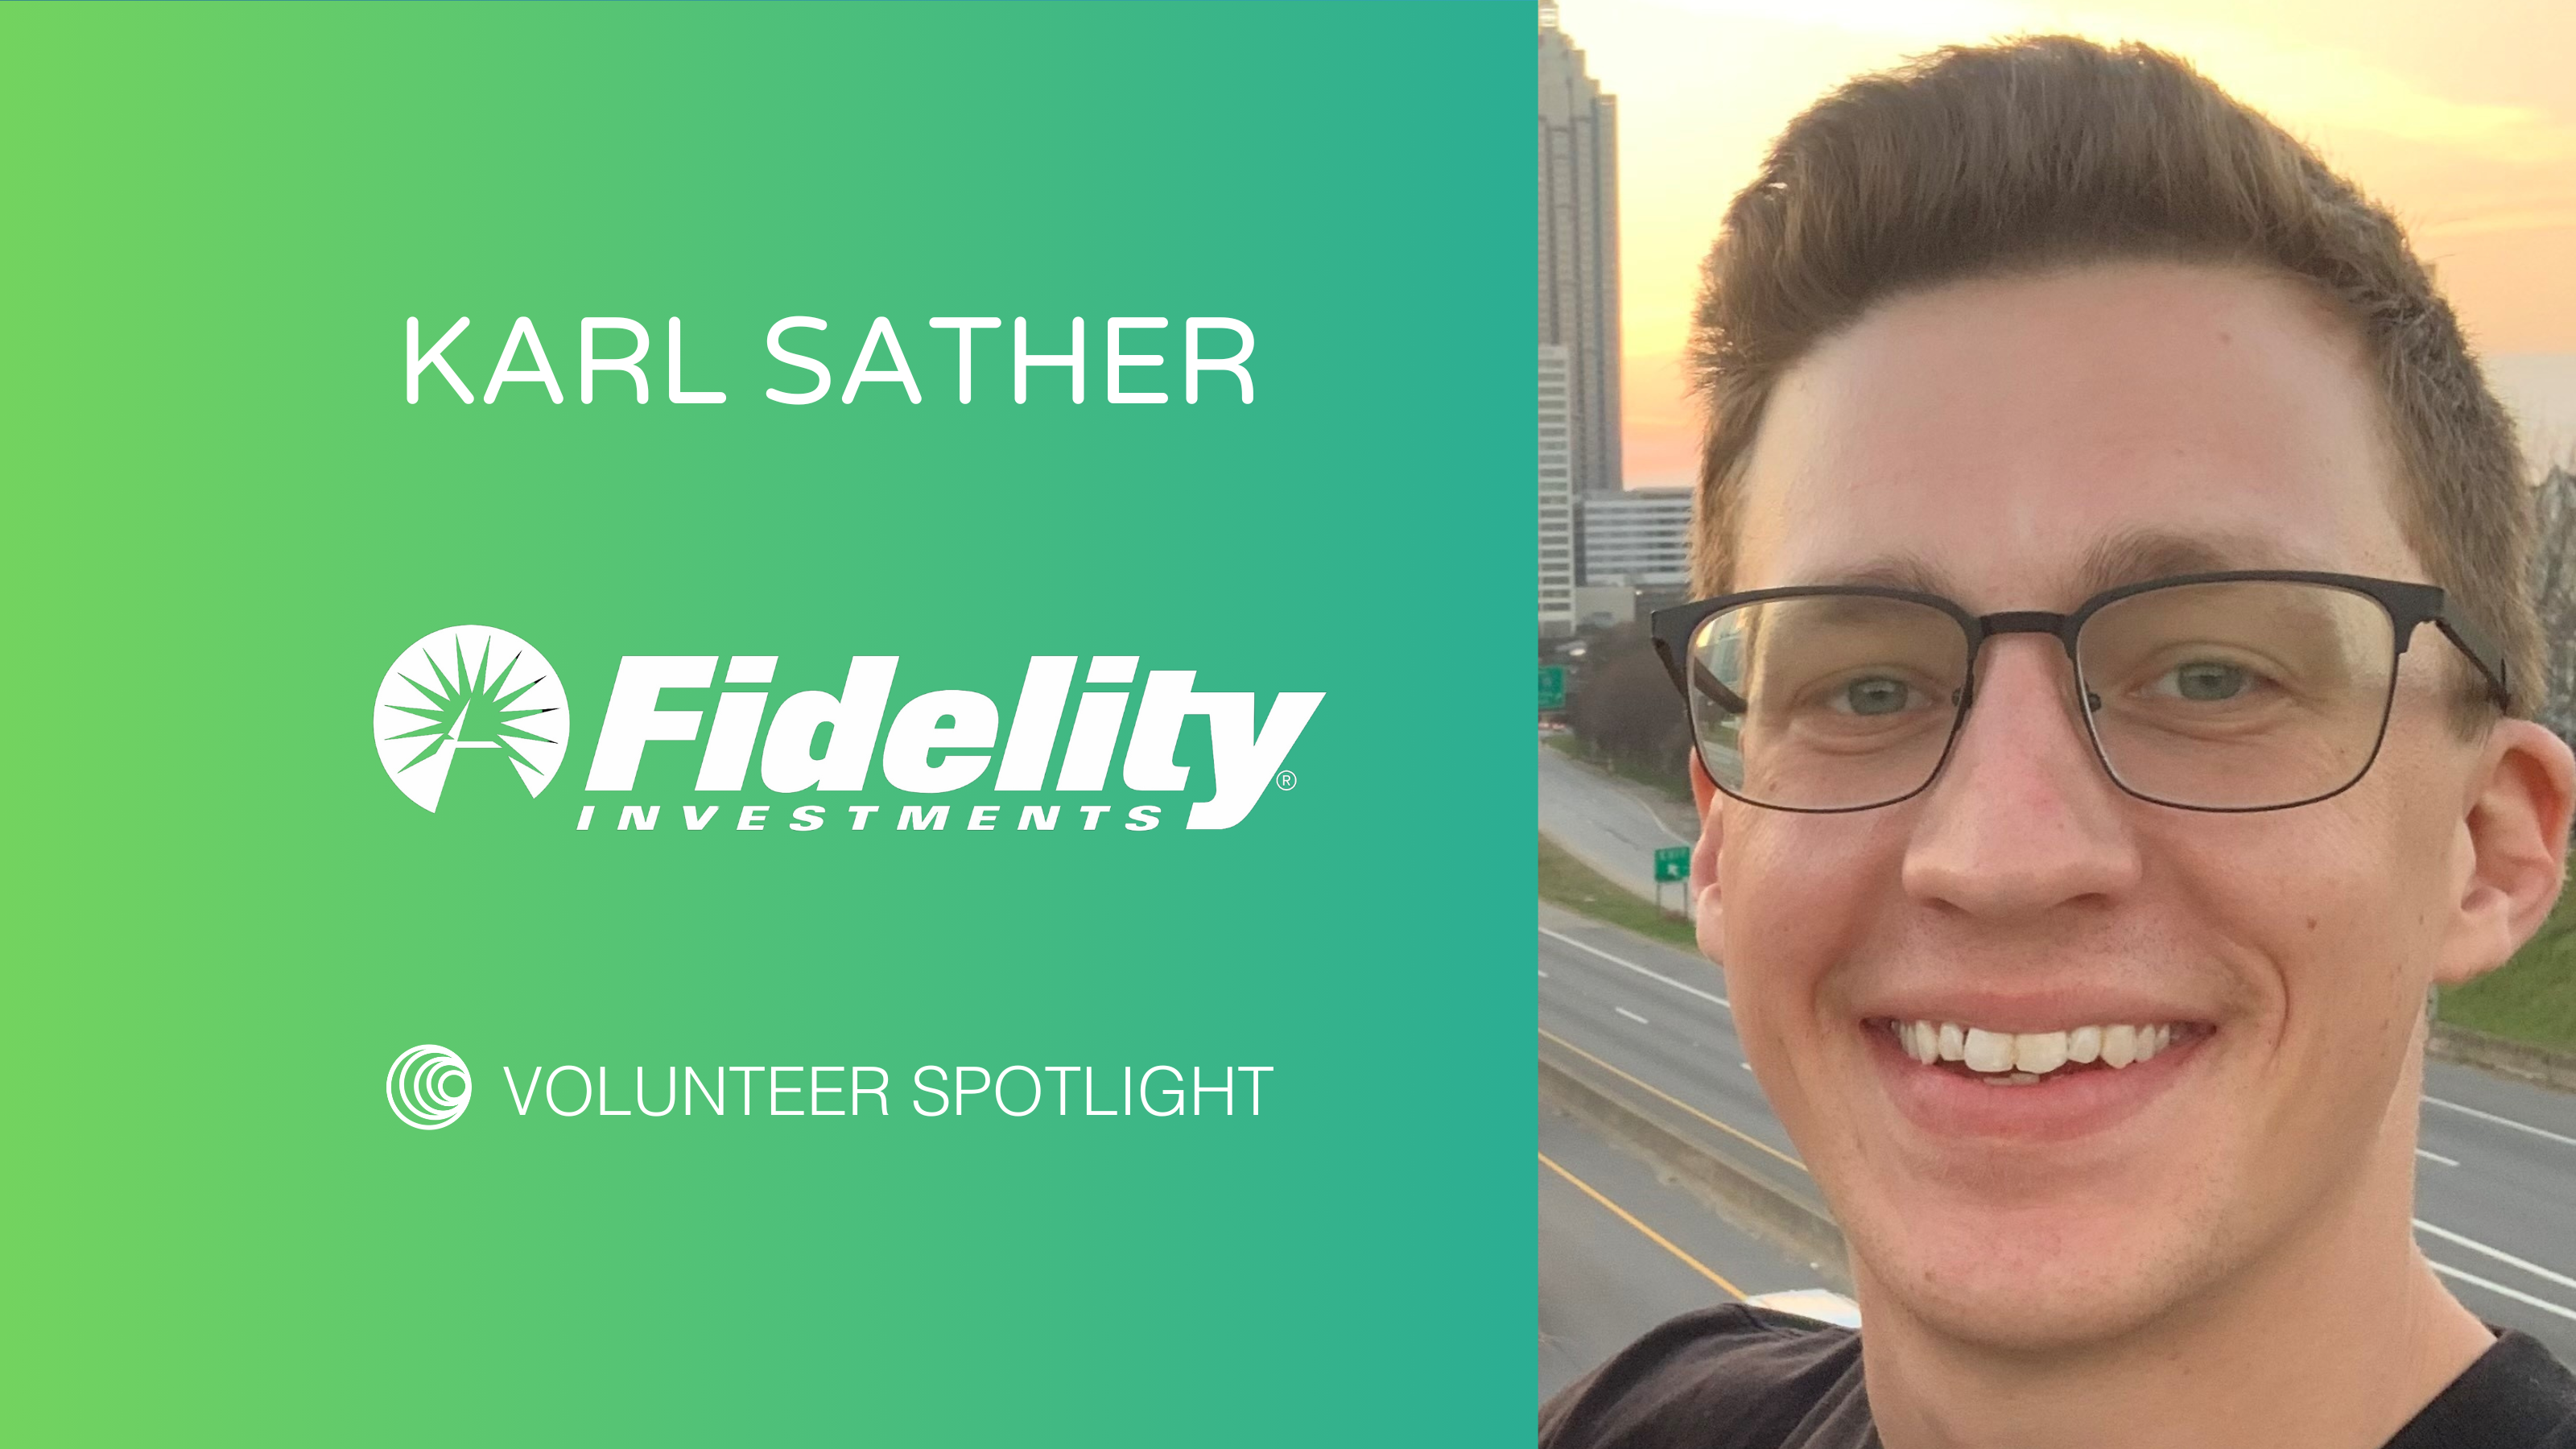 Karl Sather’s Contributions to Social Impact at Fidelity Investments